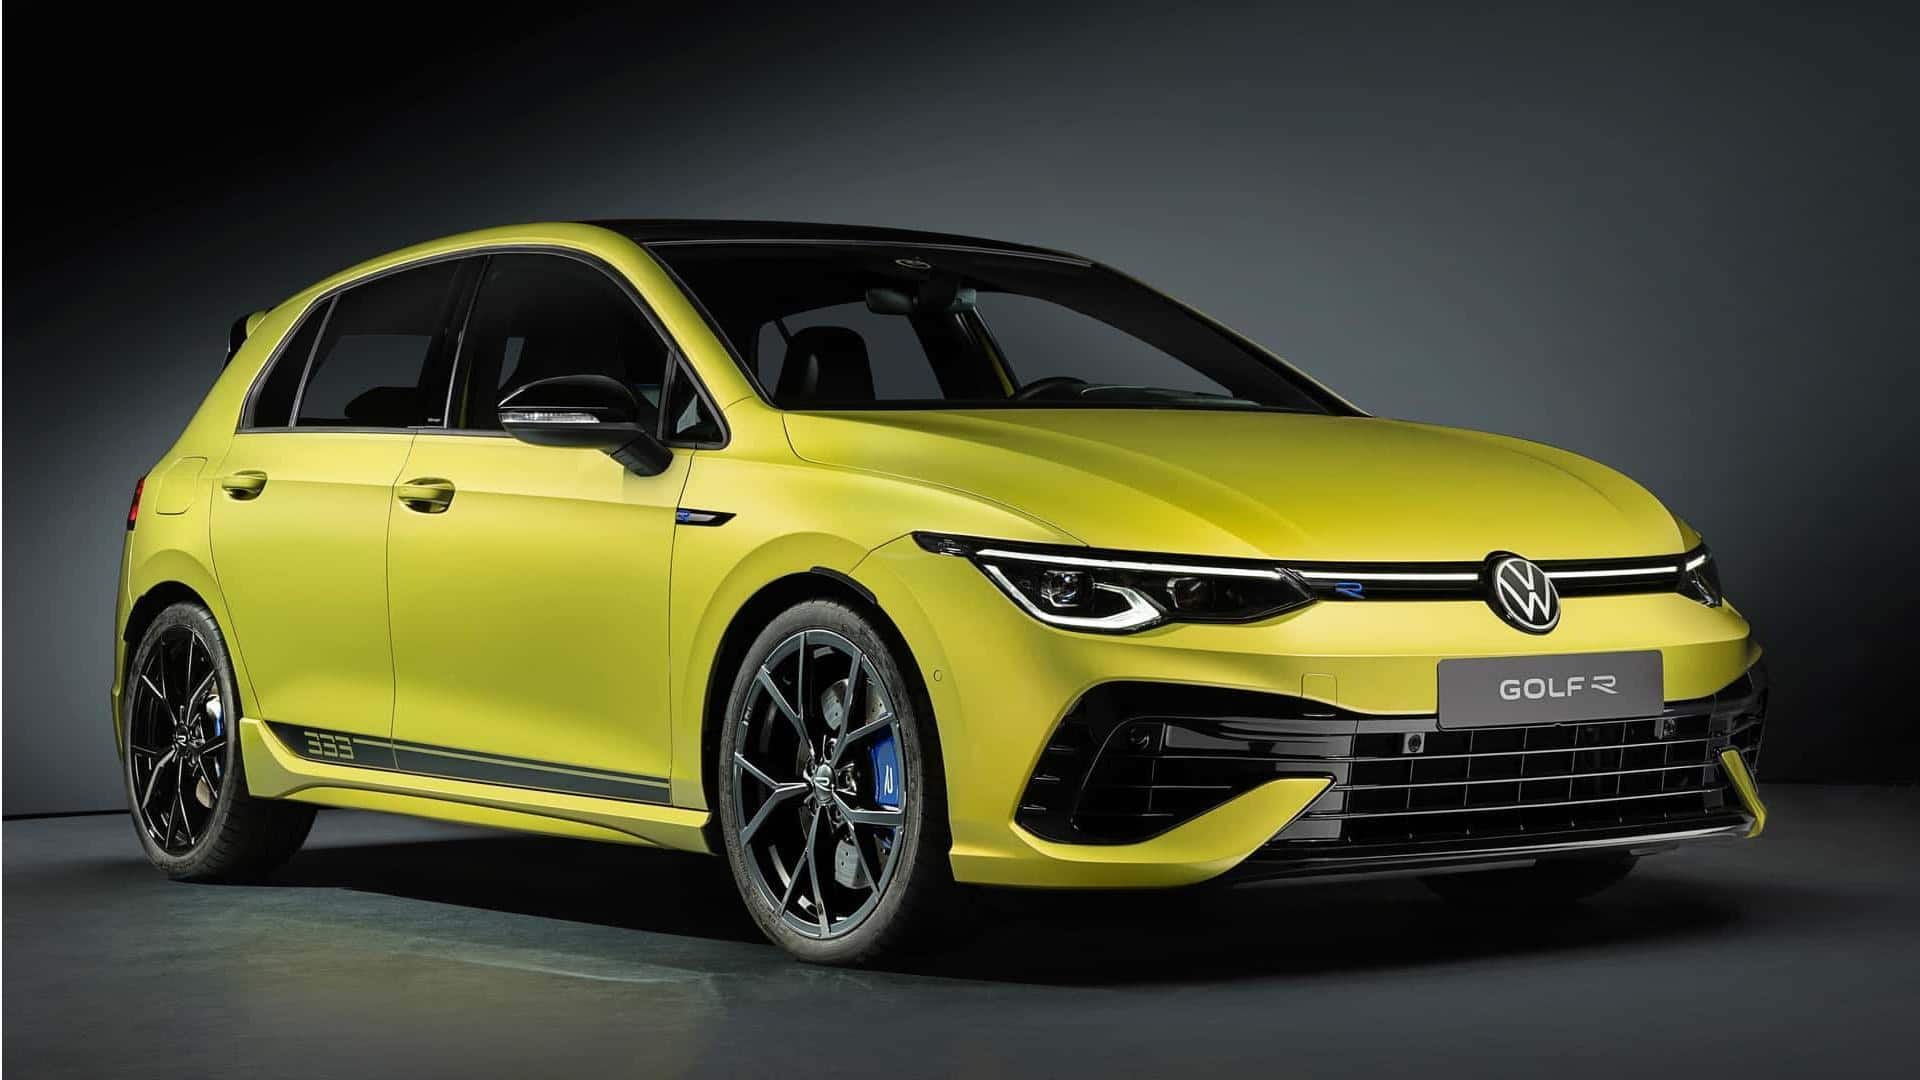 Most expensive Volkswagen Golf variant sold out in 8 minutes